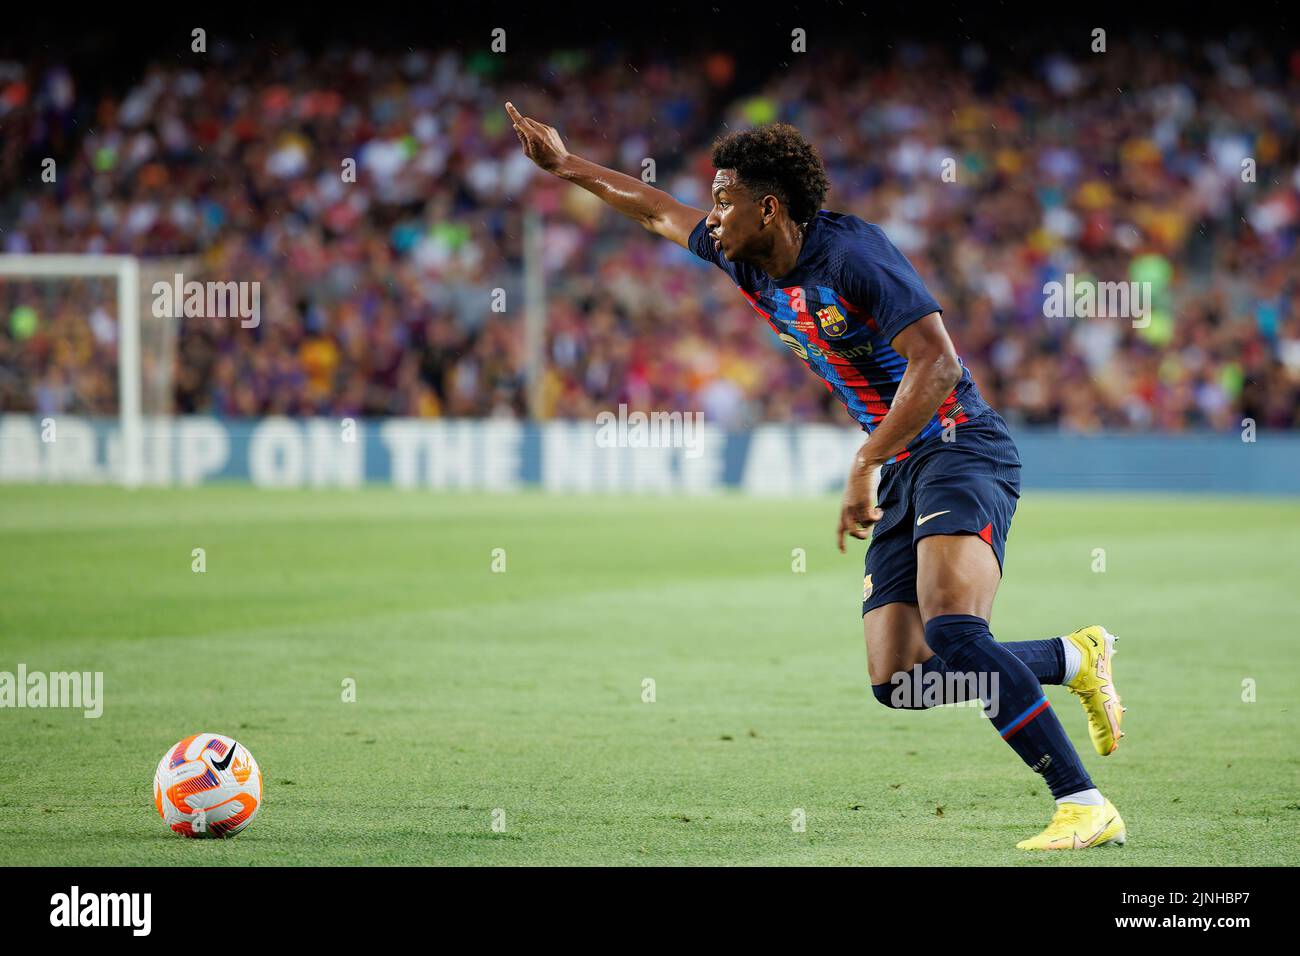 BARCELONA - AUG 7: Balde in action during the Joan Gamper Throphy match between FC Barcelona and Pumas at the Camp Nou Stadium on August 7, 2022 in Ba Stock Photo